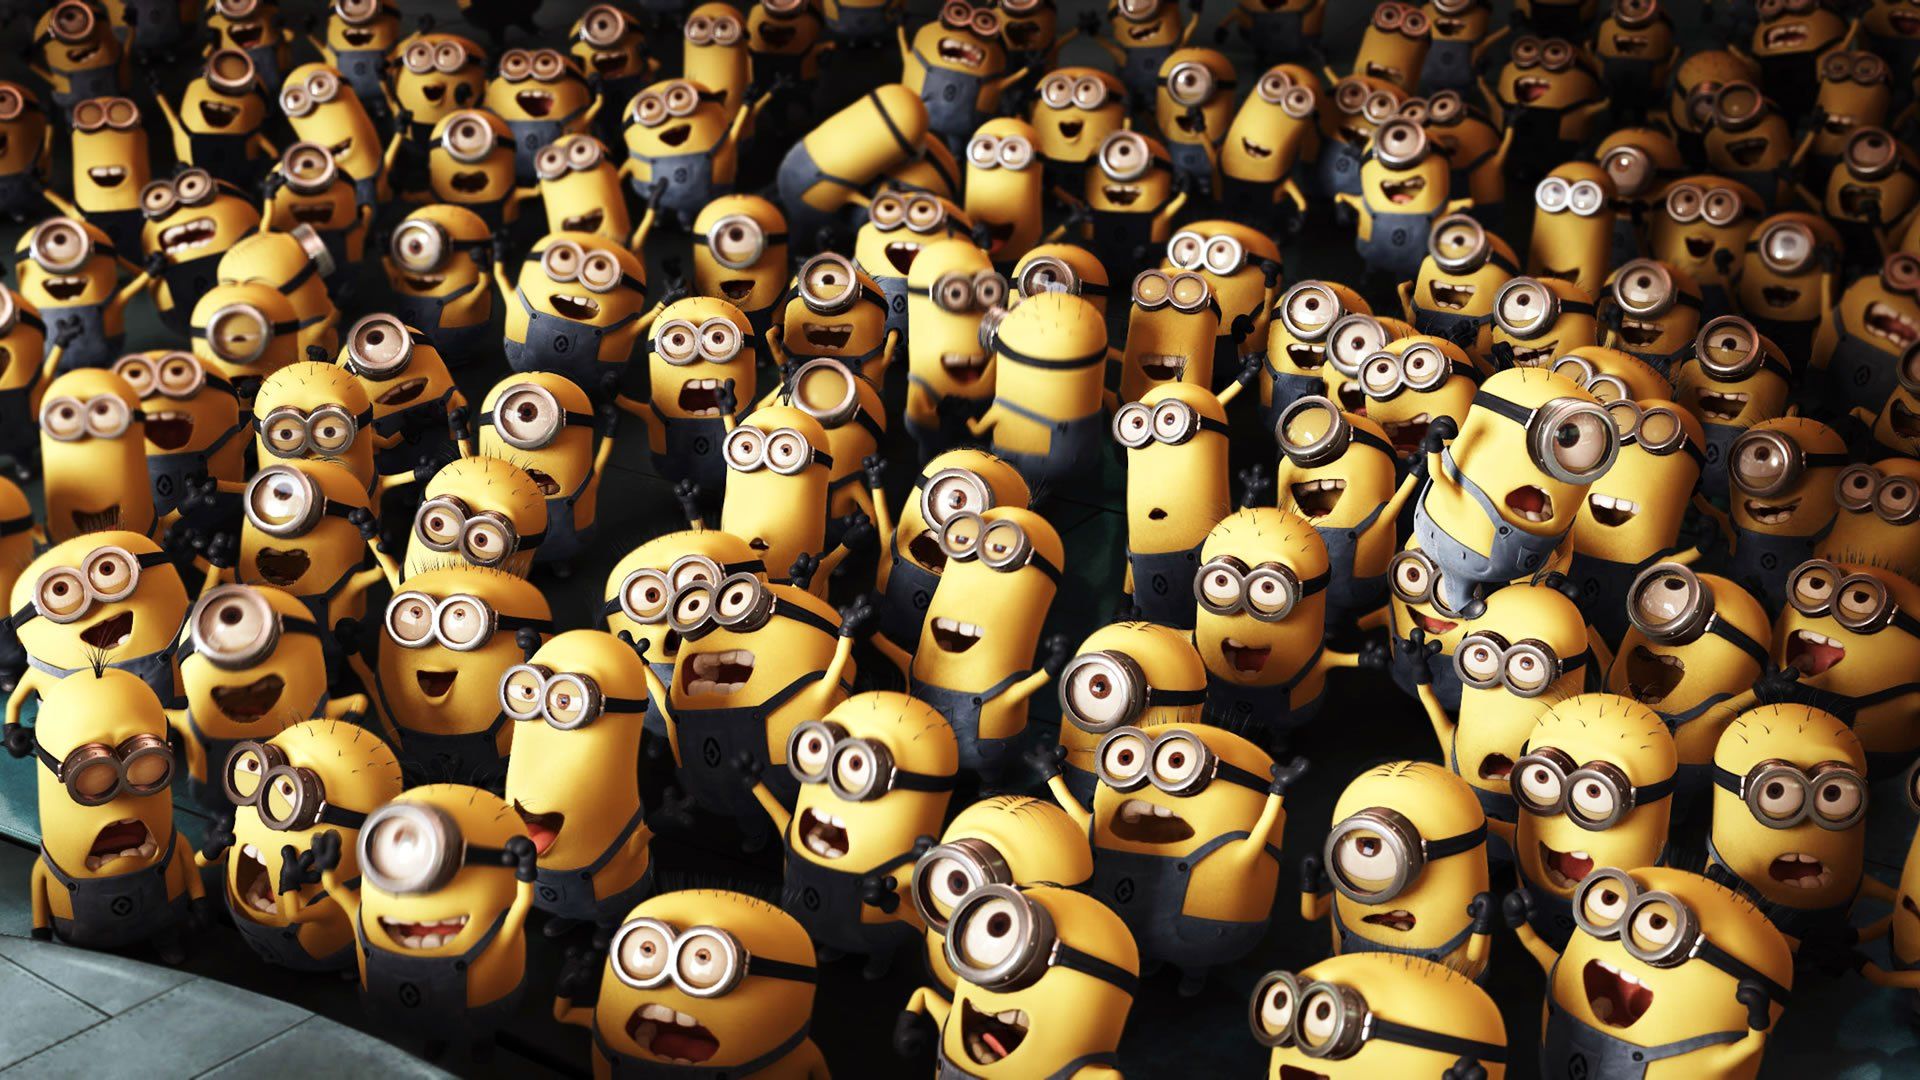 Despicable Me Minions Wallpapers Despicable Me Minions